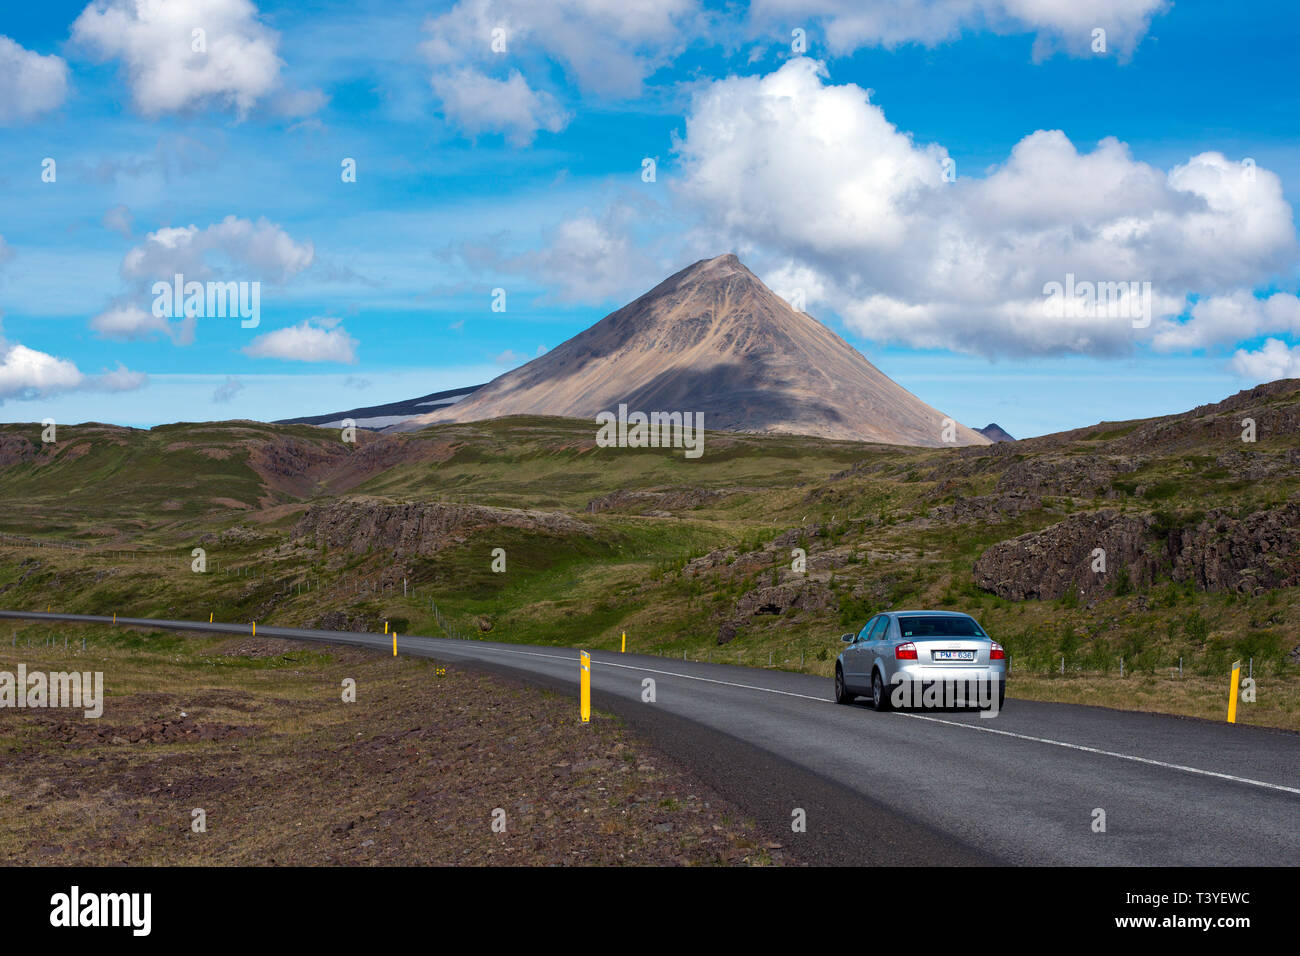 Car passing the Baula mountain as seen from route 60, Western Region, Iceland.Iceland Stock Photo